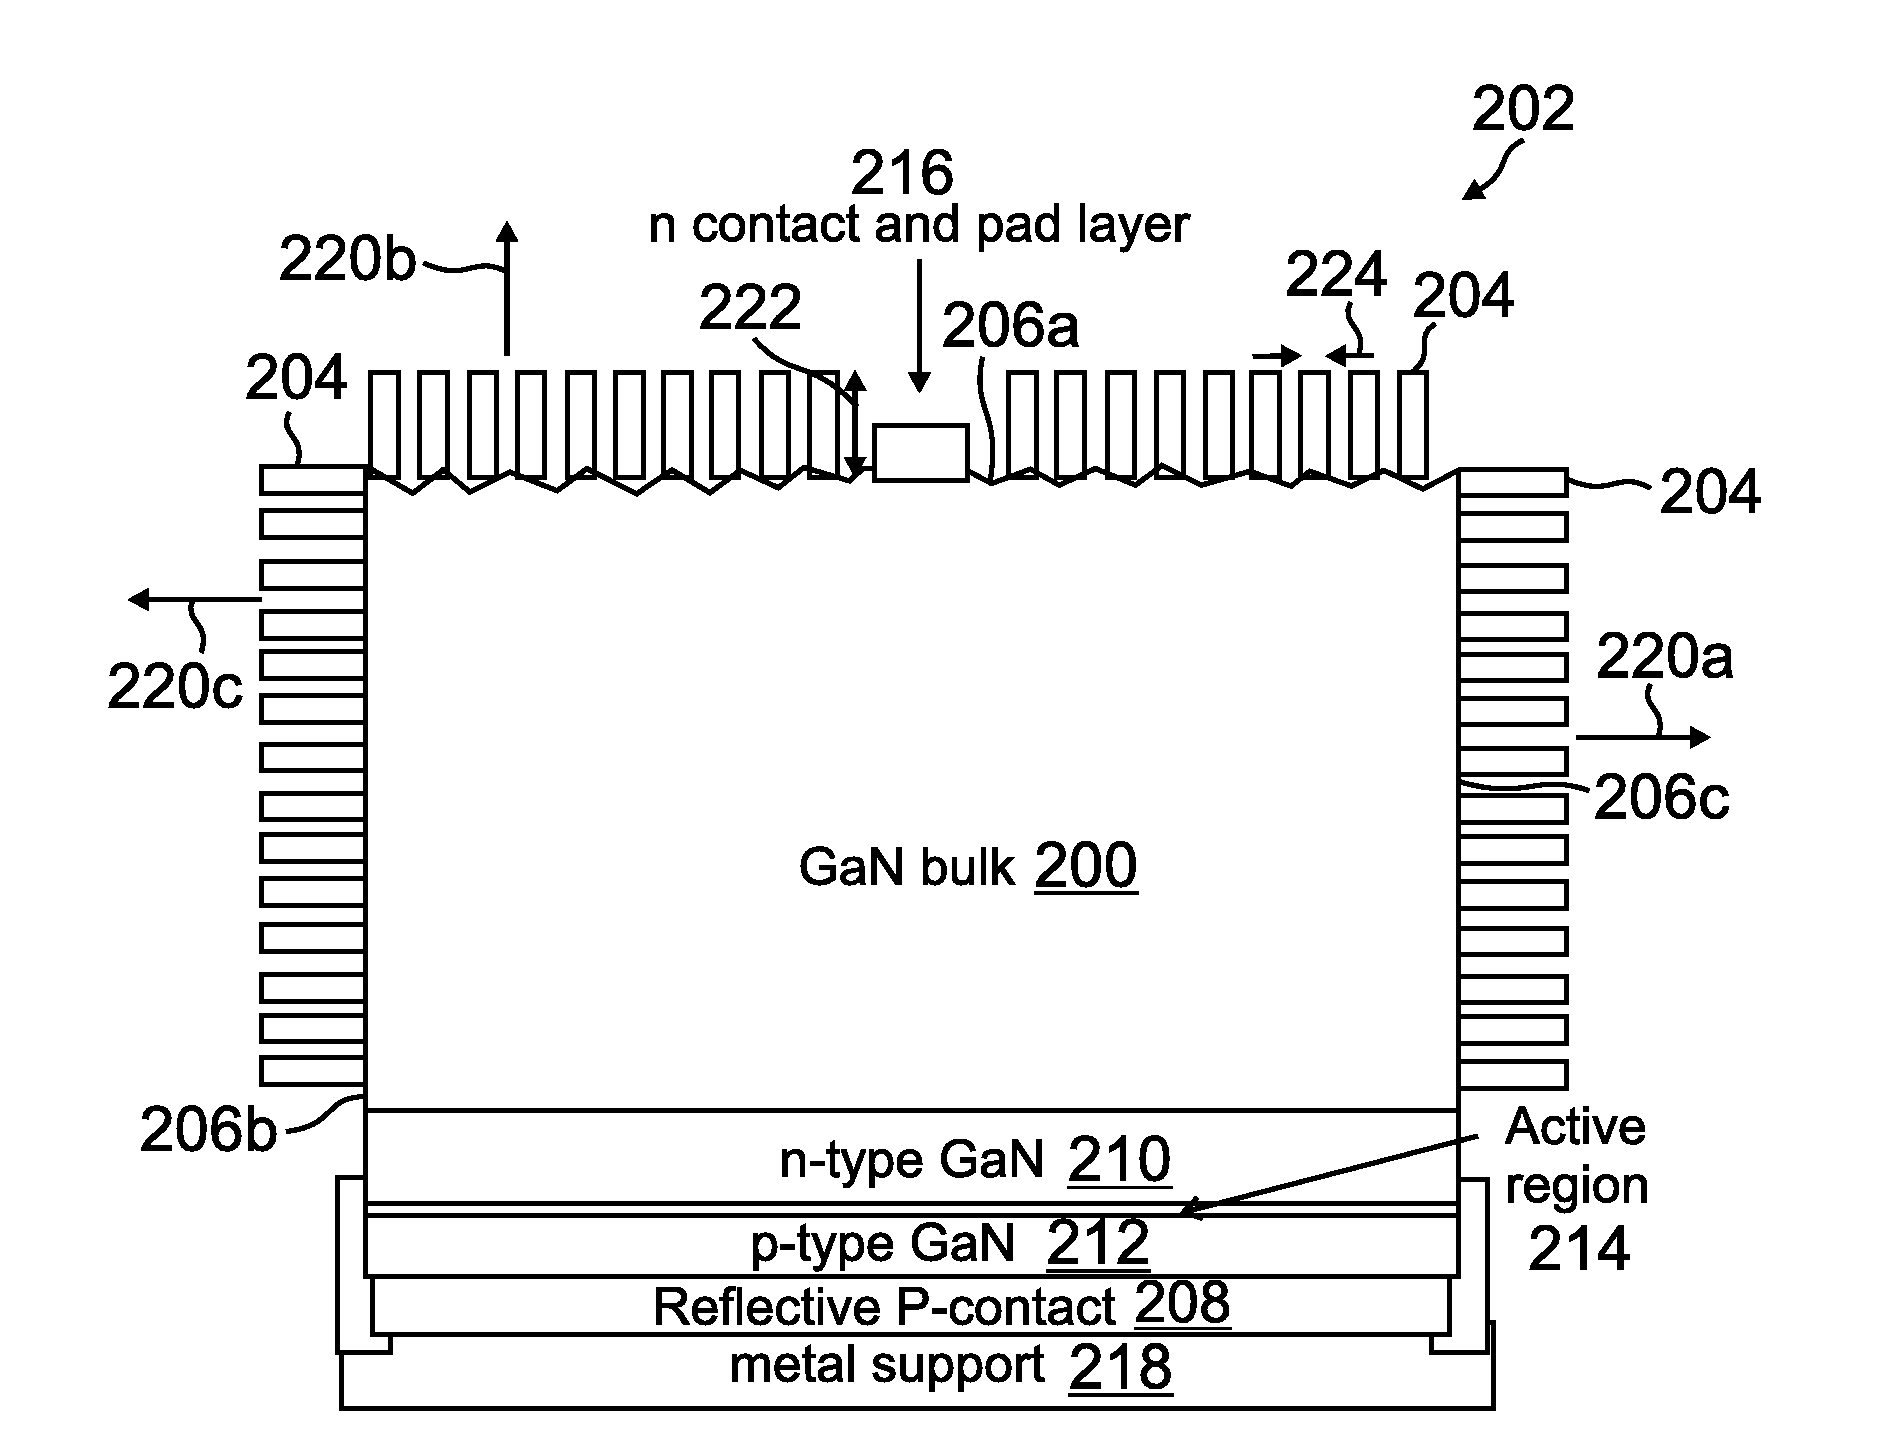 Light emitting diode structure utilizing zinc oxide nanorod arrays on one or more surfaces, and a low cost method of producing such zinc oxide nanorod arrays